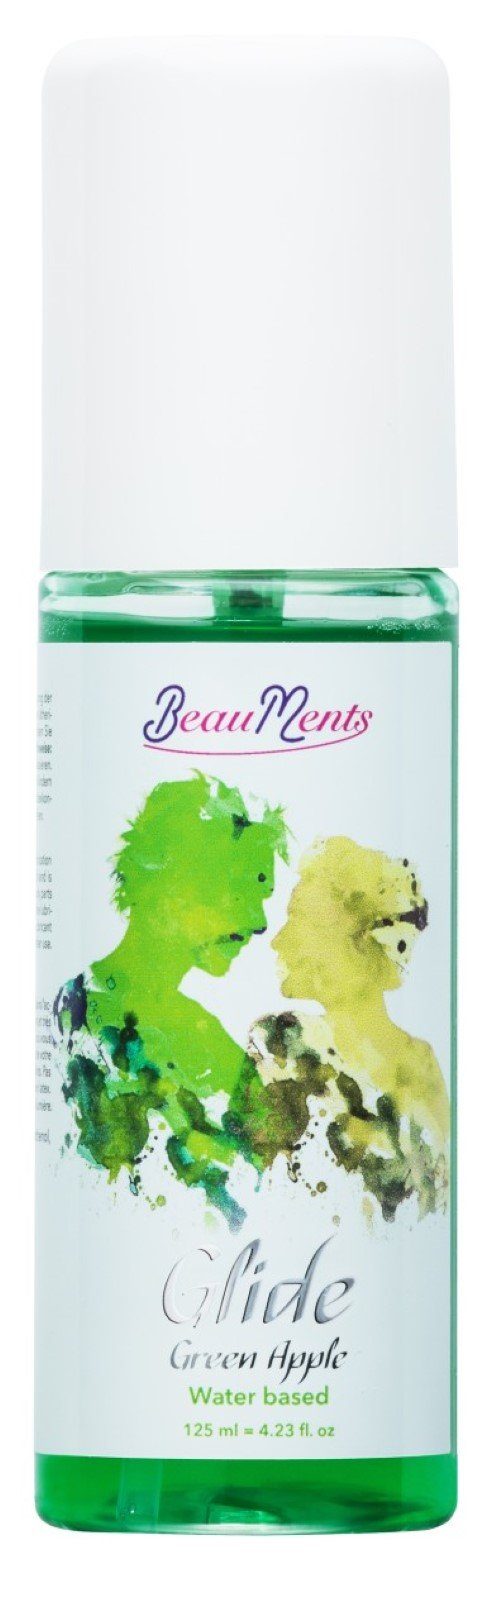 Beauments Gleitgel 125 ml - BeauMents Glide Green Apple (water based) 125 ml